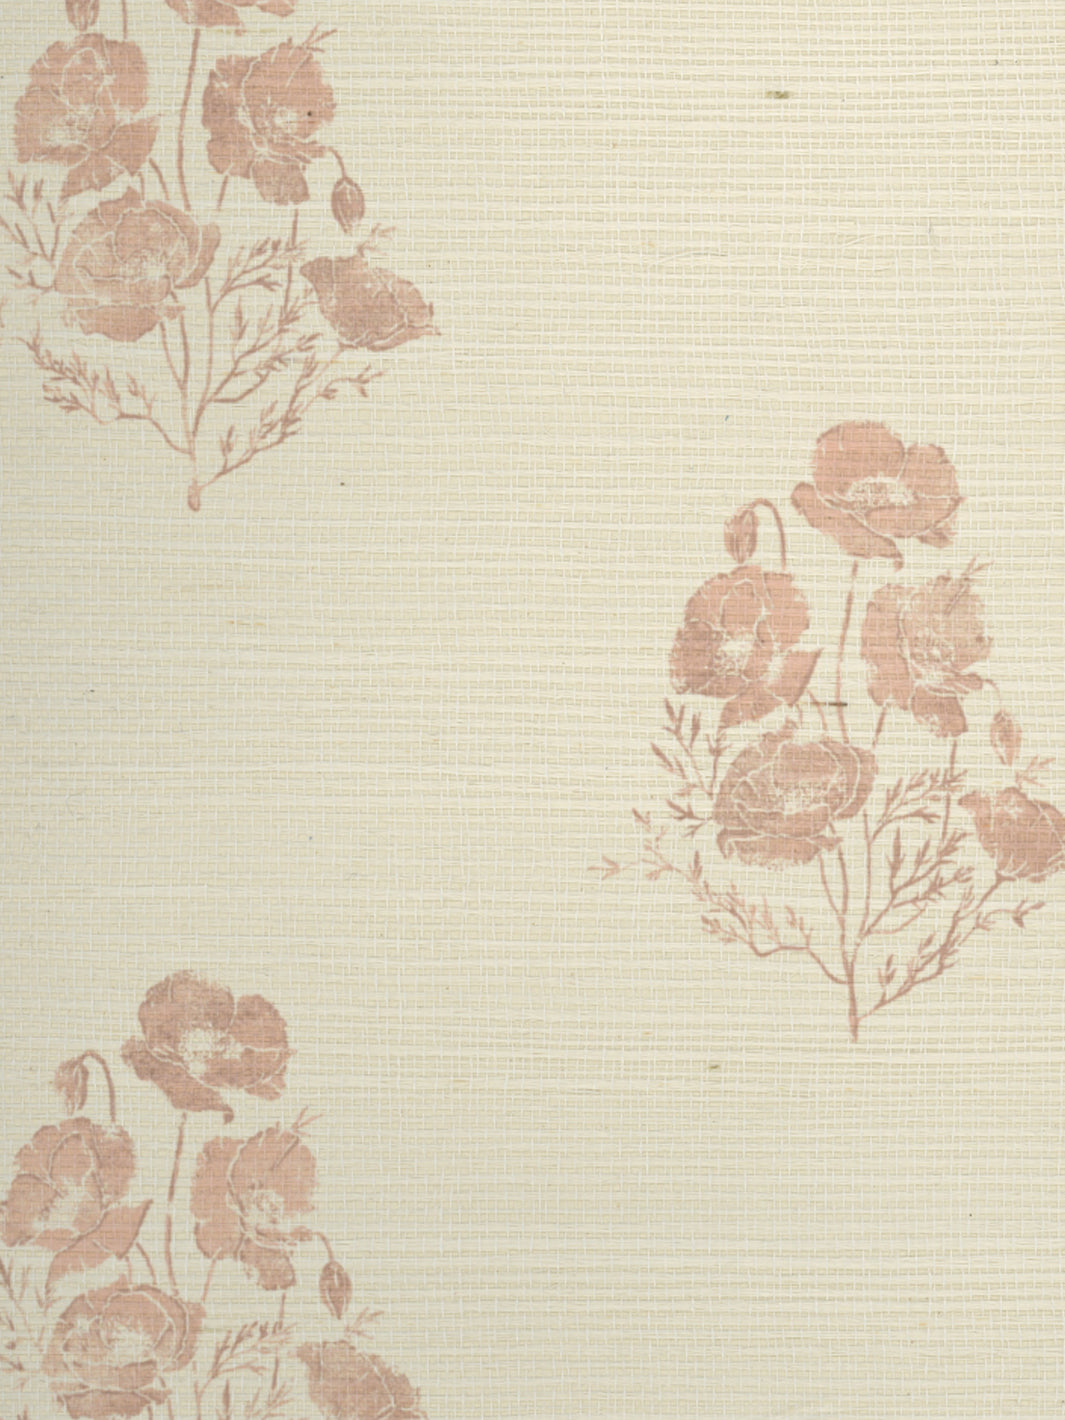 'California Poppy' Grasscloth Wallpaper by Nathan Turner - Pink